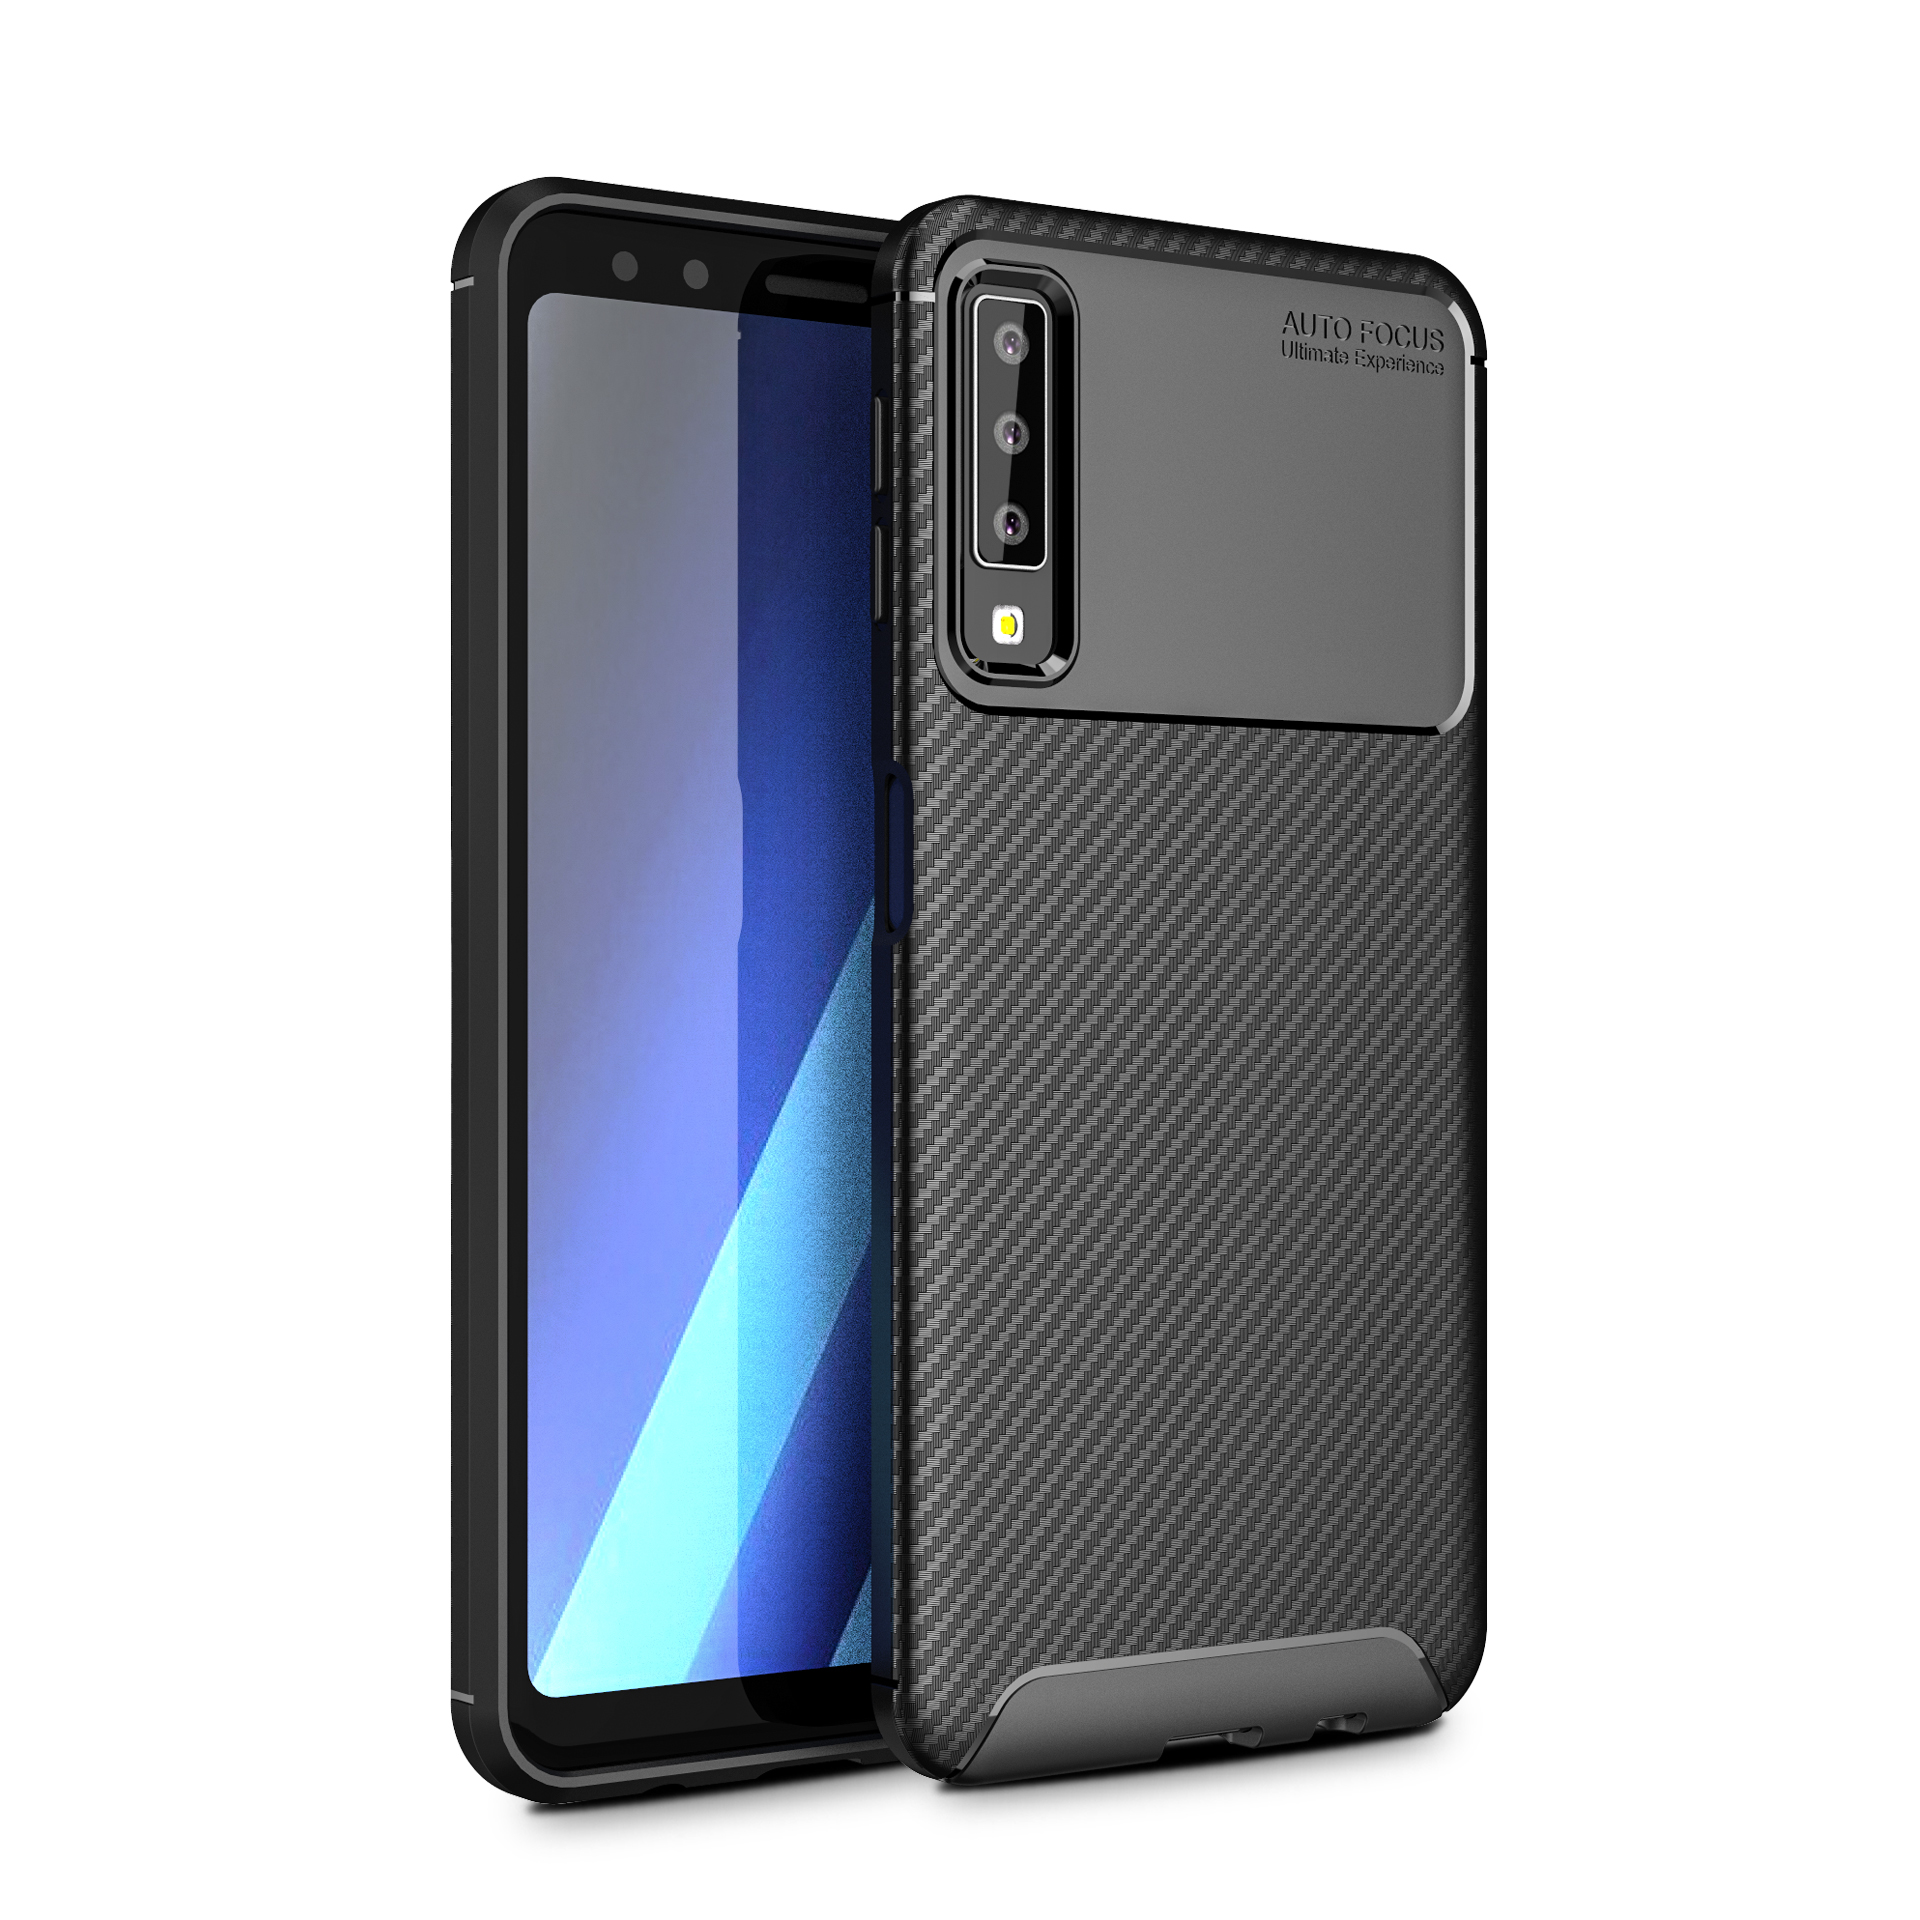 

Bakeey Protective Case For Samsung Galaxy A7 2018 Carbon Fiber Fingerprint Resistant Soft TPU Back Cover